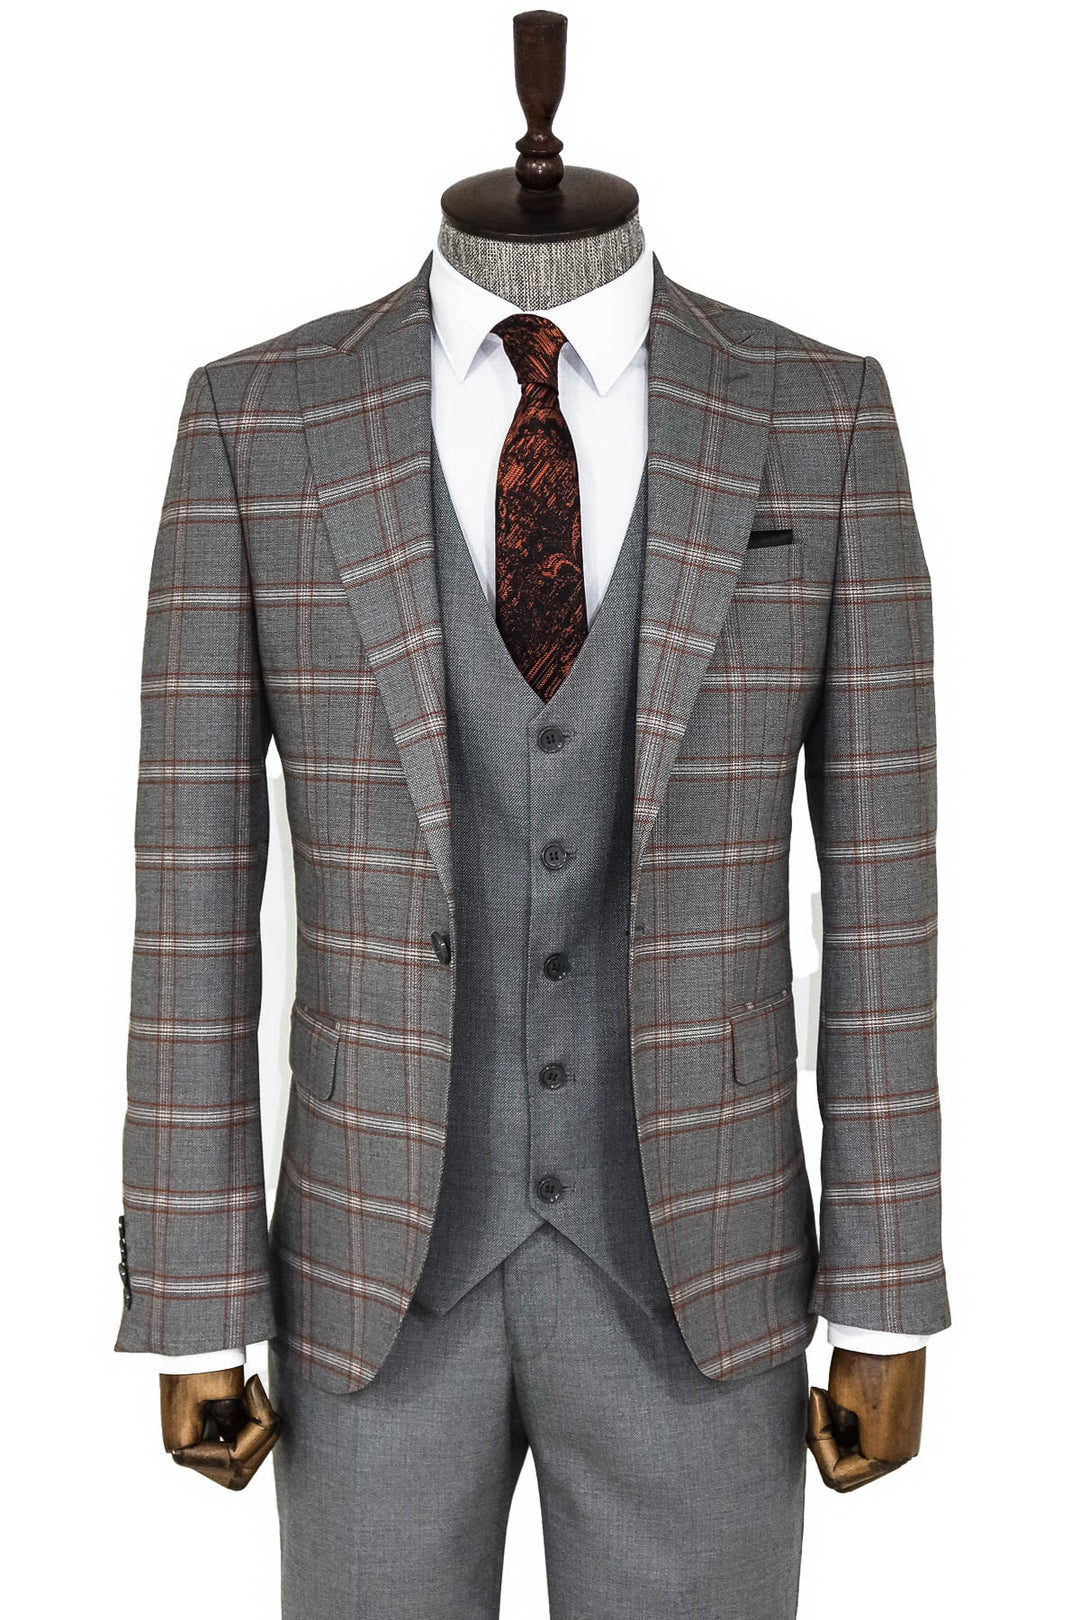 Checked Patterned Grey Slim Fit Suit - Wessi